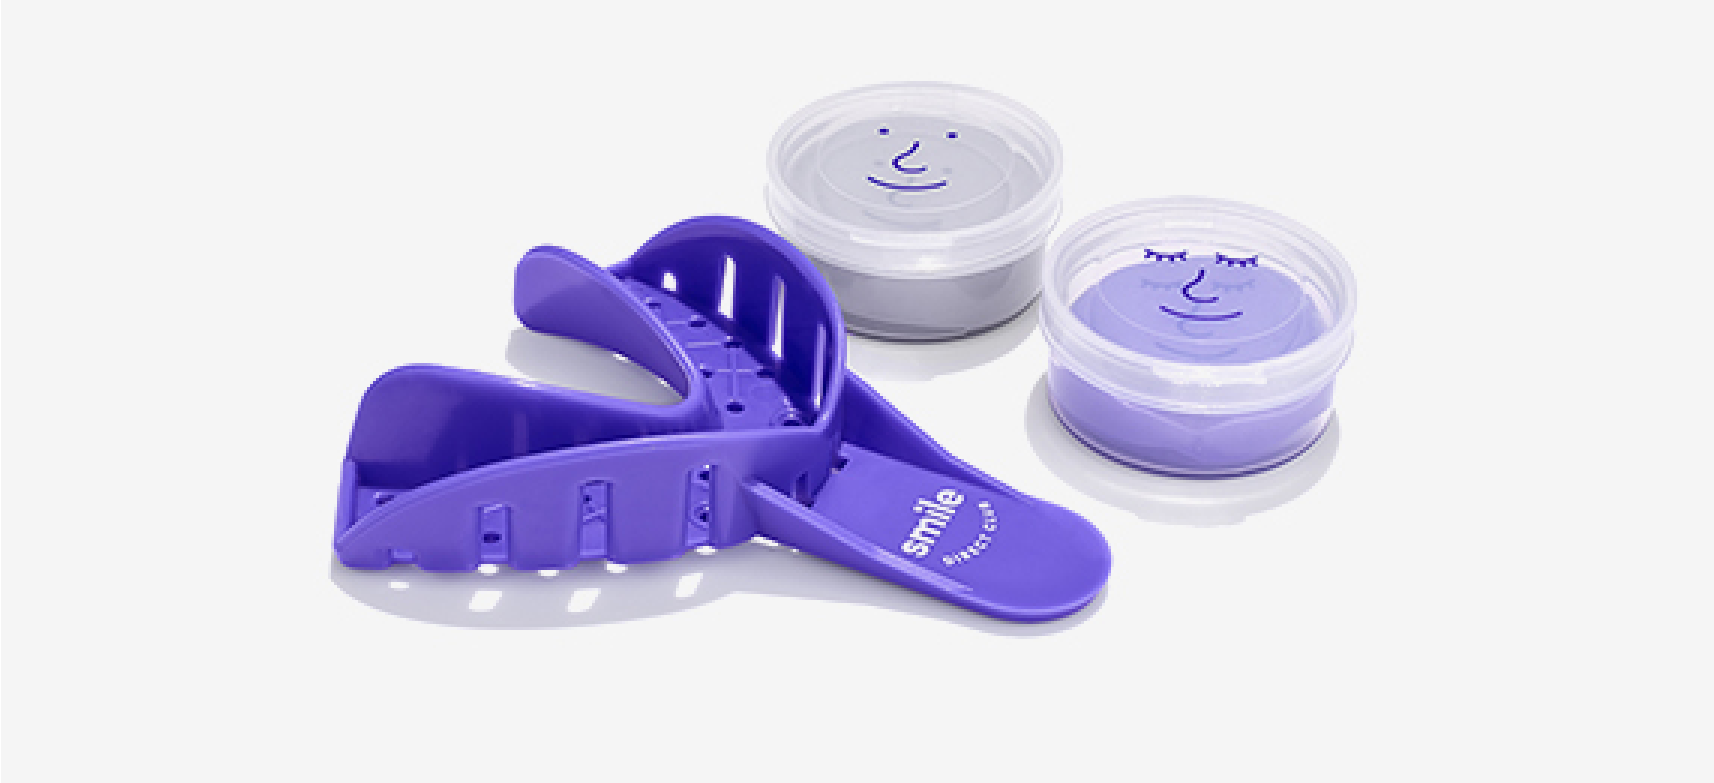 SmileDirectClub Impression tray with two small gray and purple putty containers